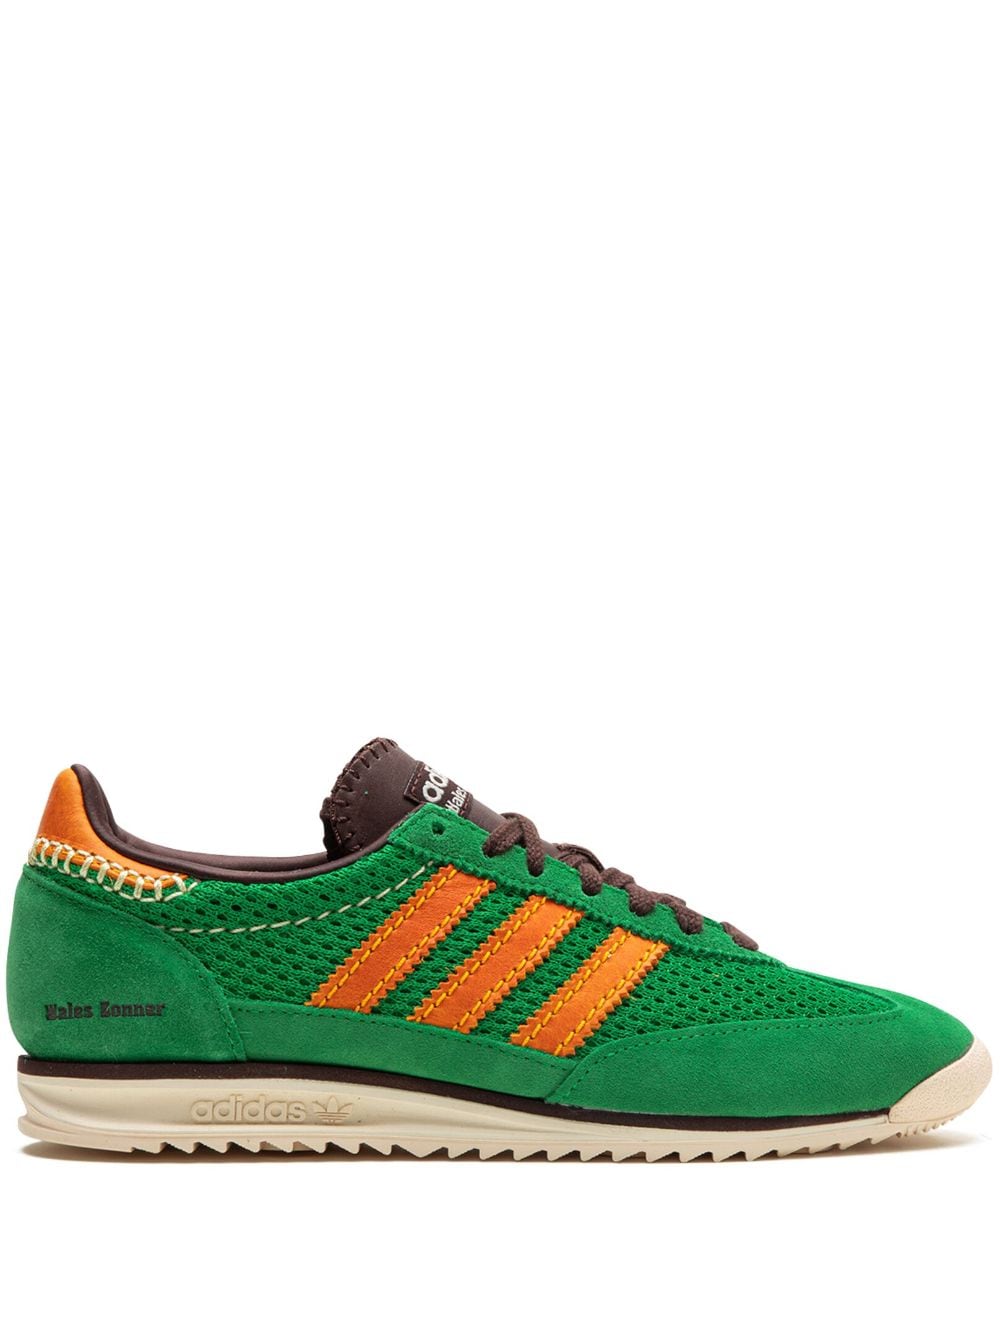 adidas x Wales Bonner SL72 knitted sneakers - Green von adidas